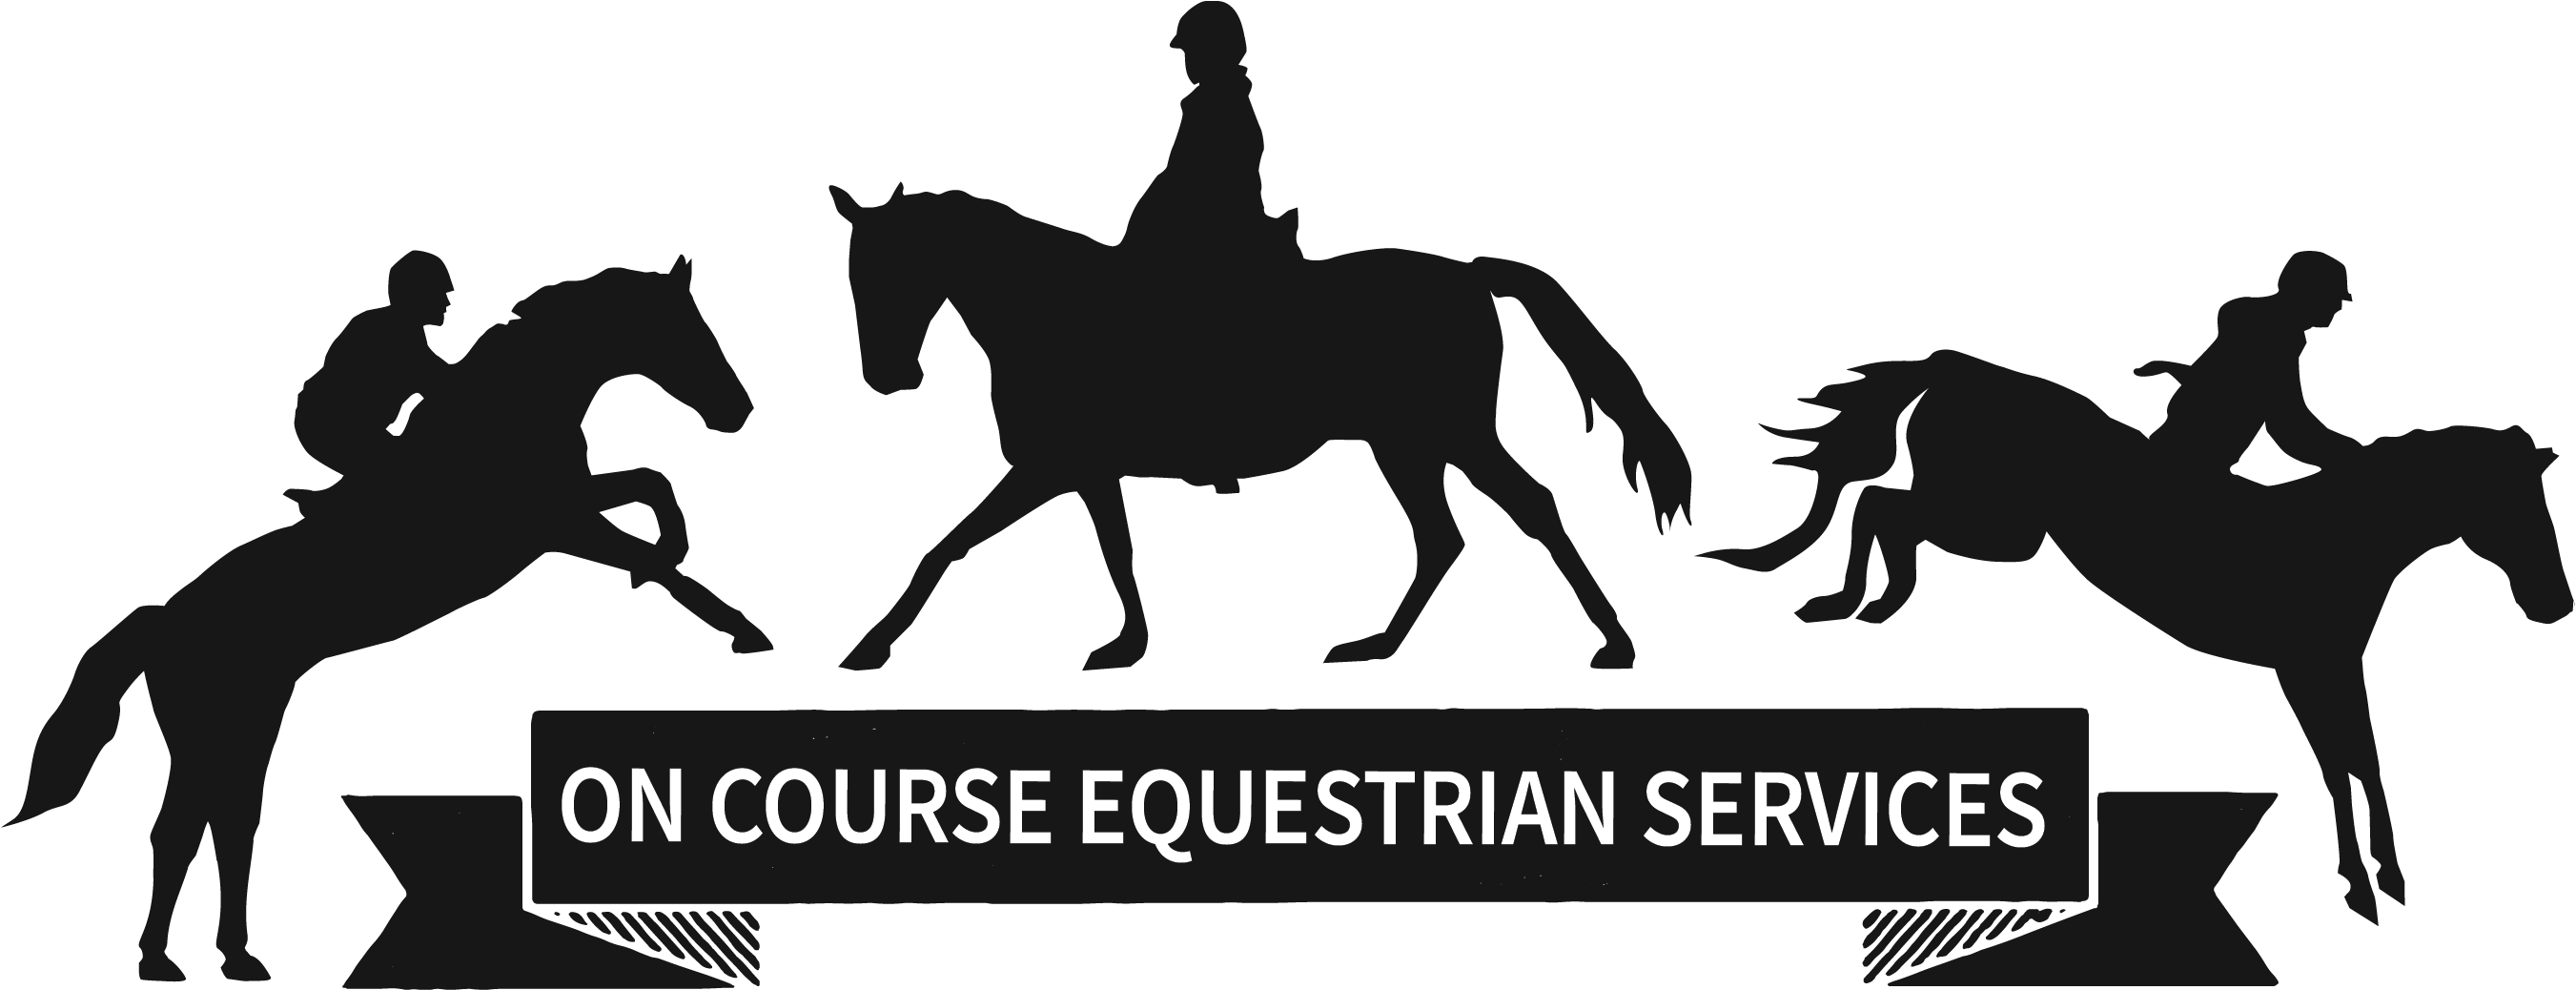 A Silhouette Of A Person Riding A Horse